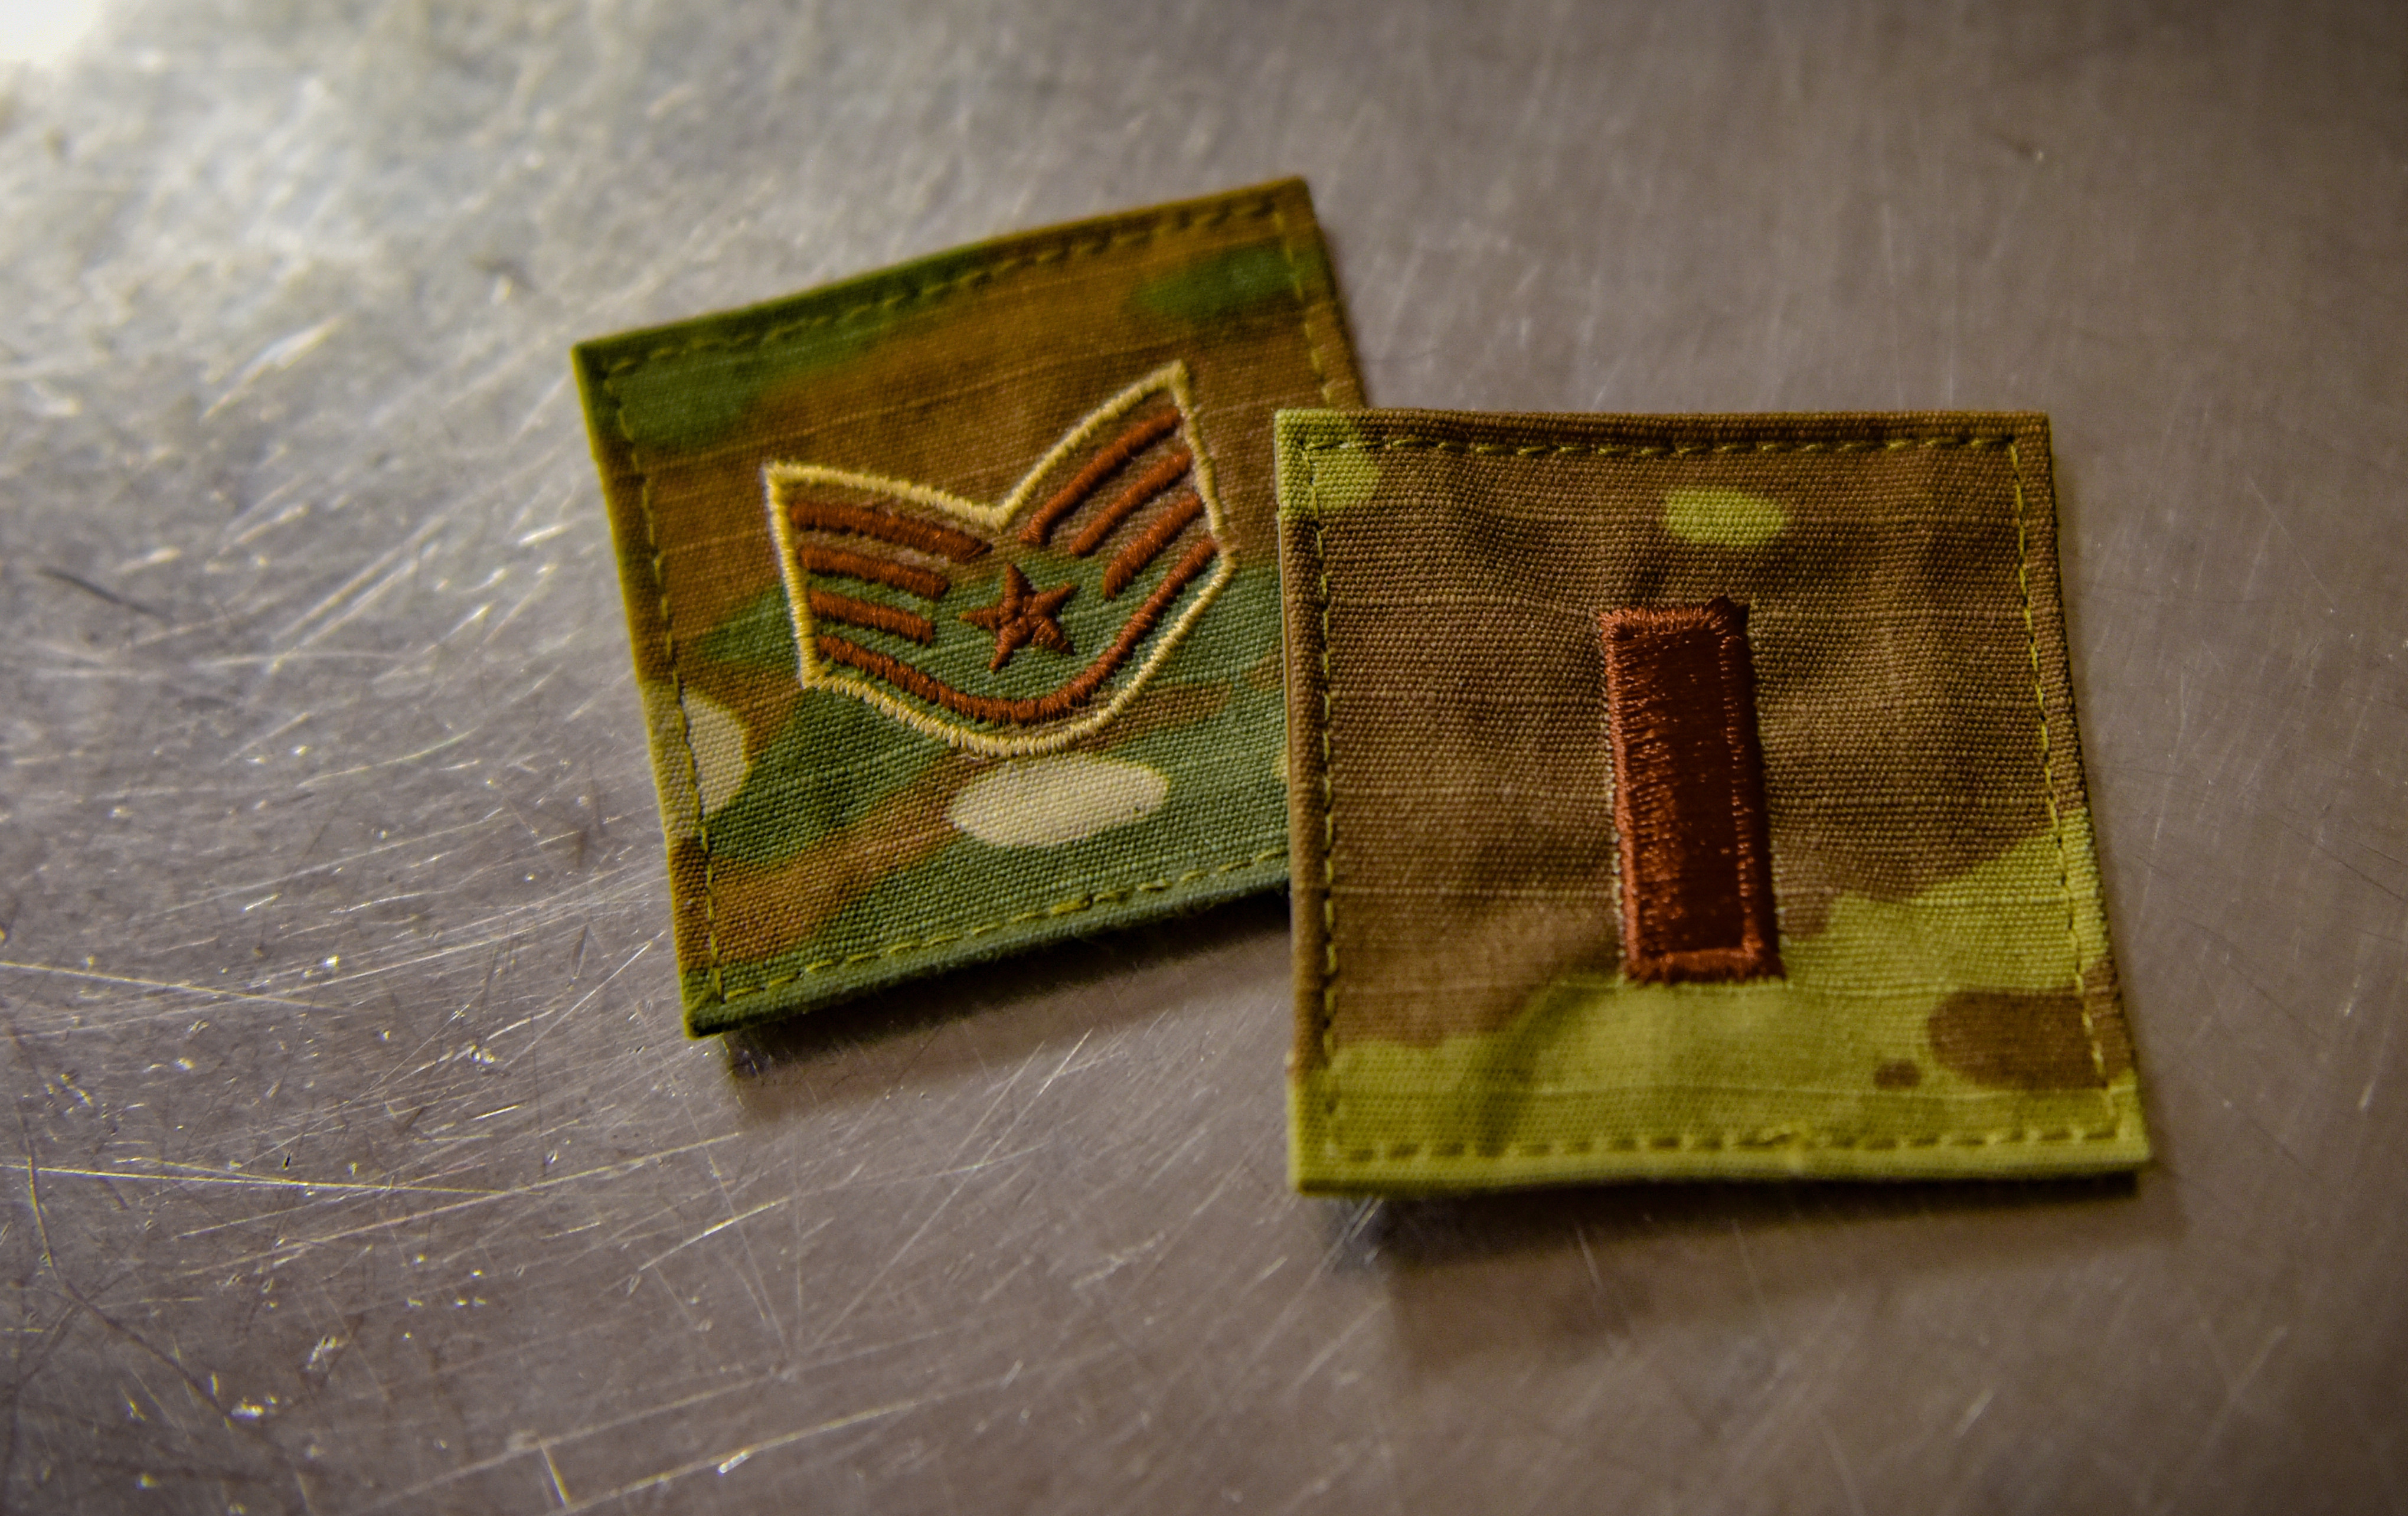 Two rank patches